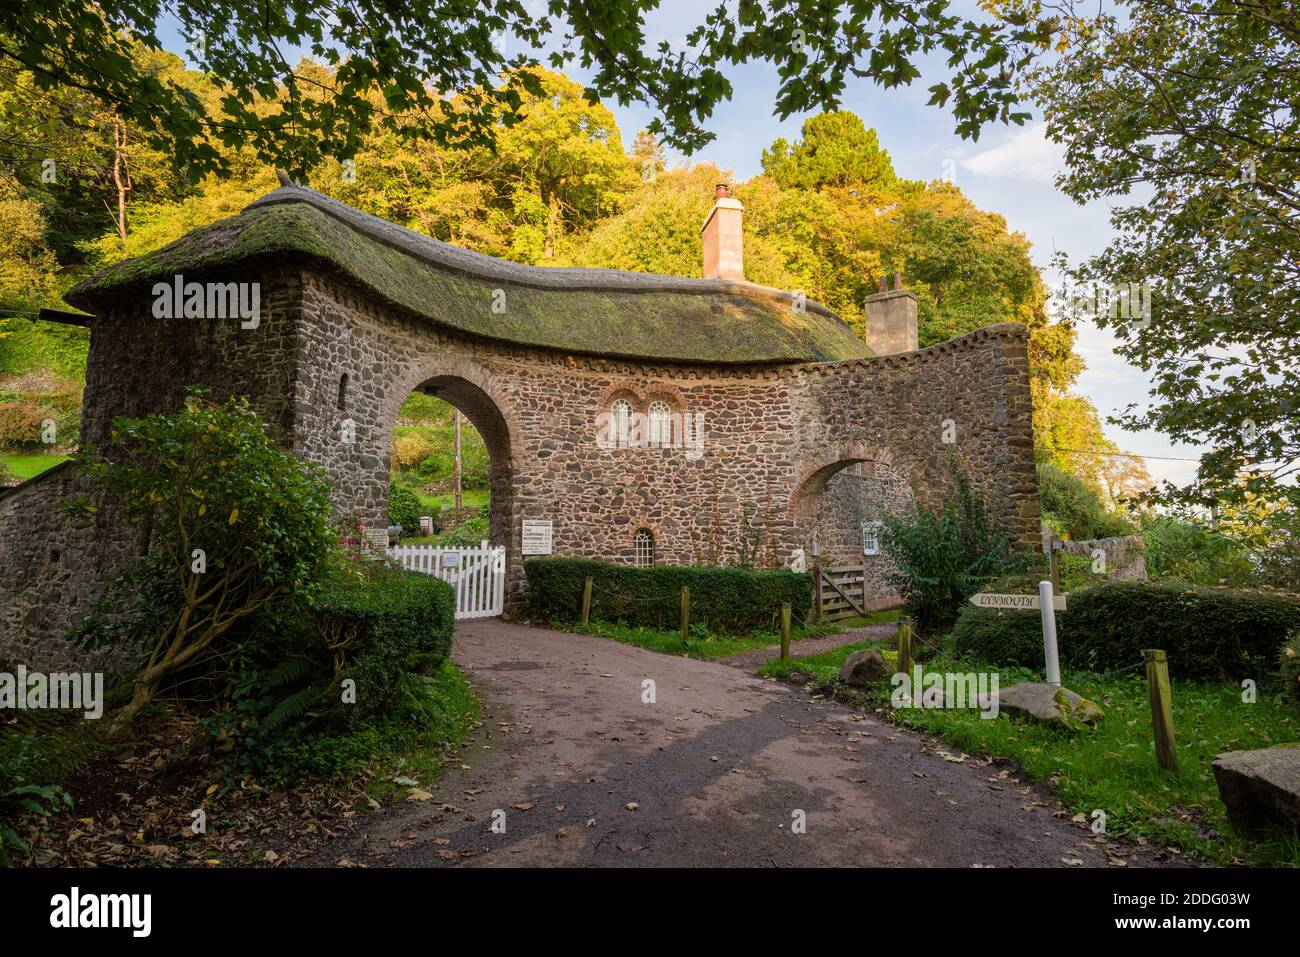 Worthy Toll House at the entrance to Worthy Toll Road near Porlock in the Exmoor National Park, Somerset, England. Stock Photo